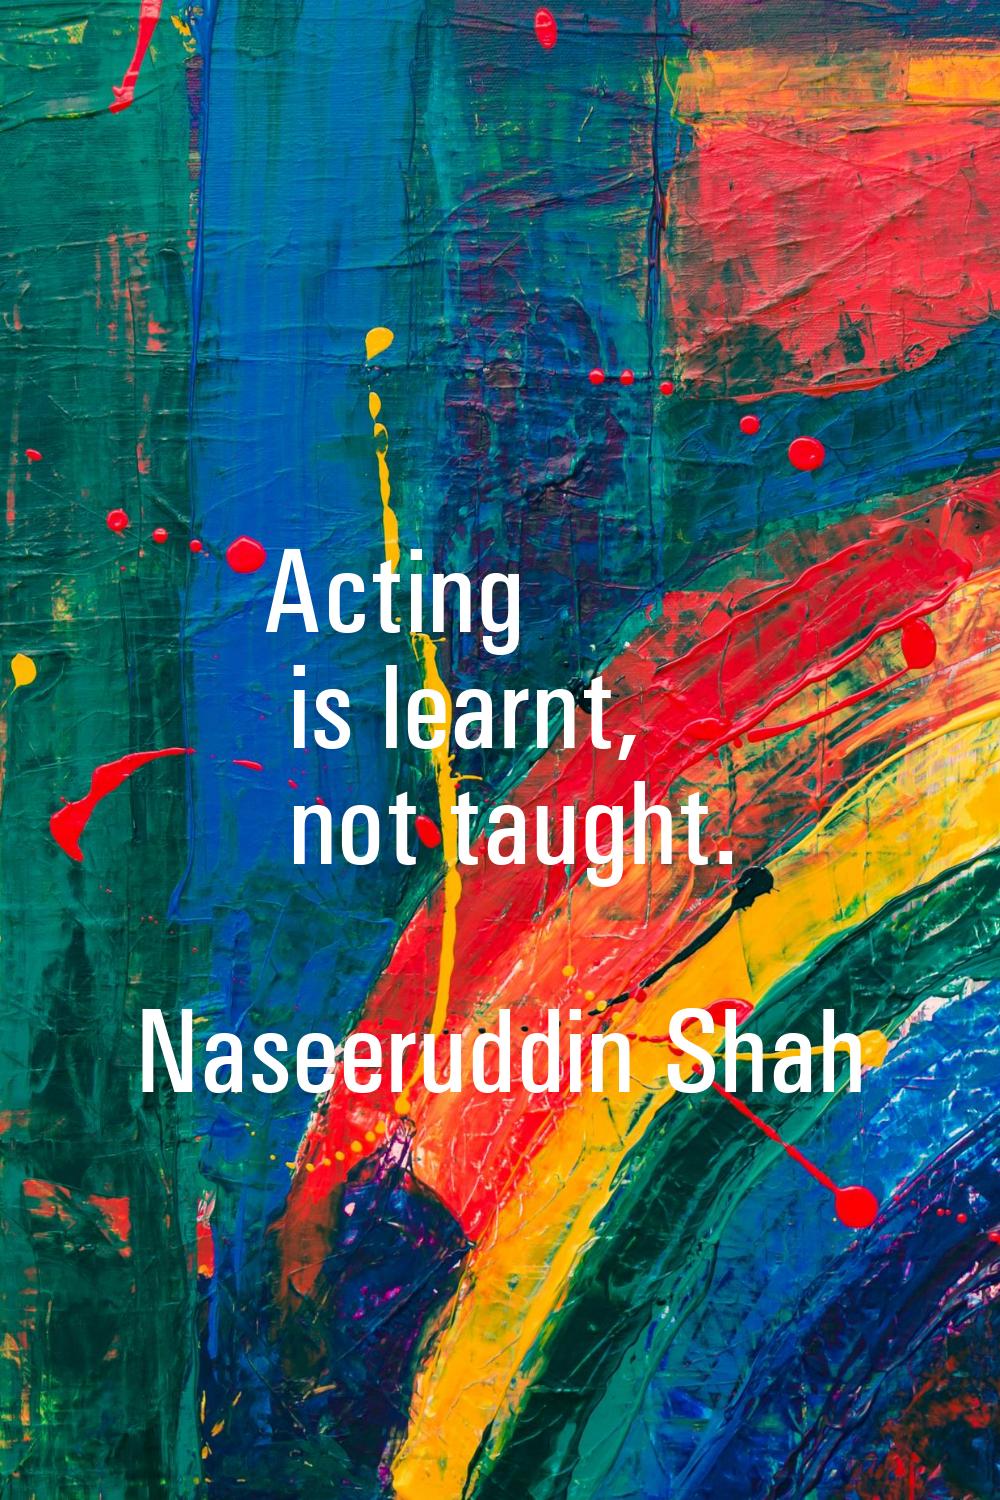 Acting is learnt, not taught.